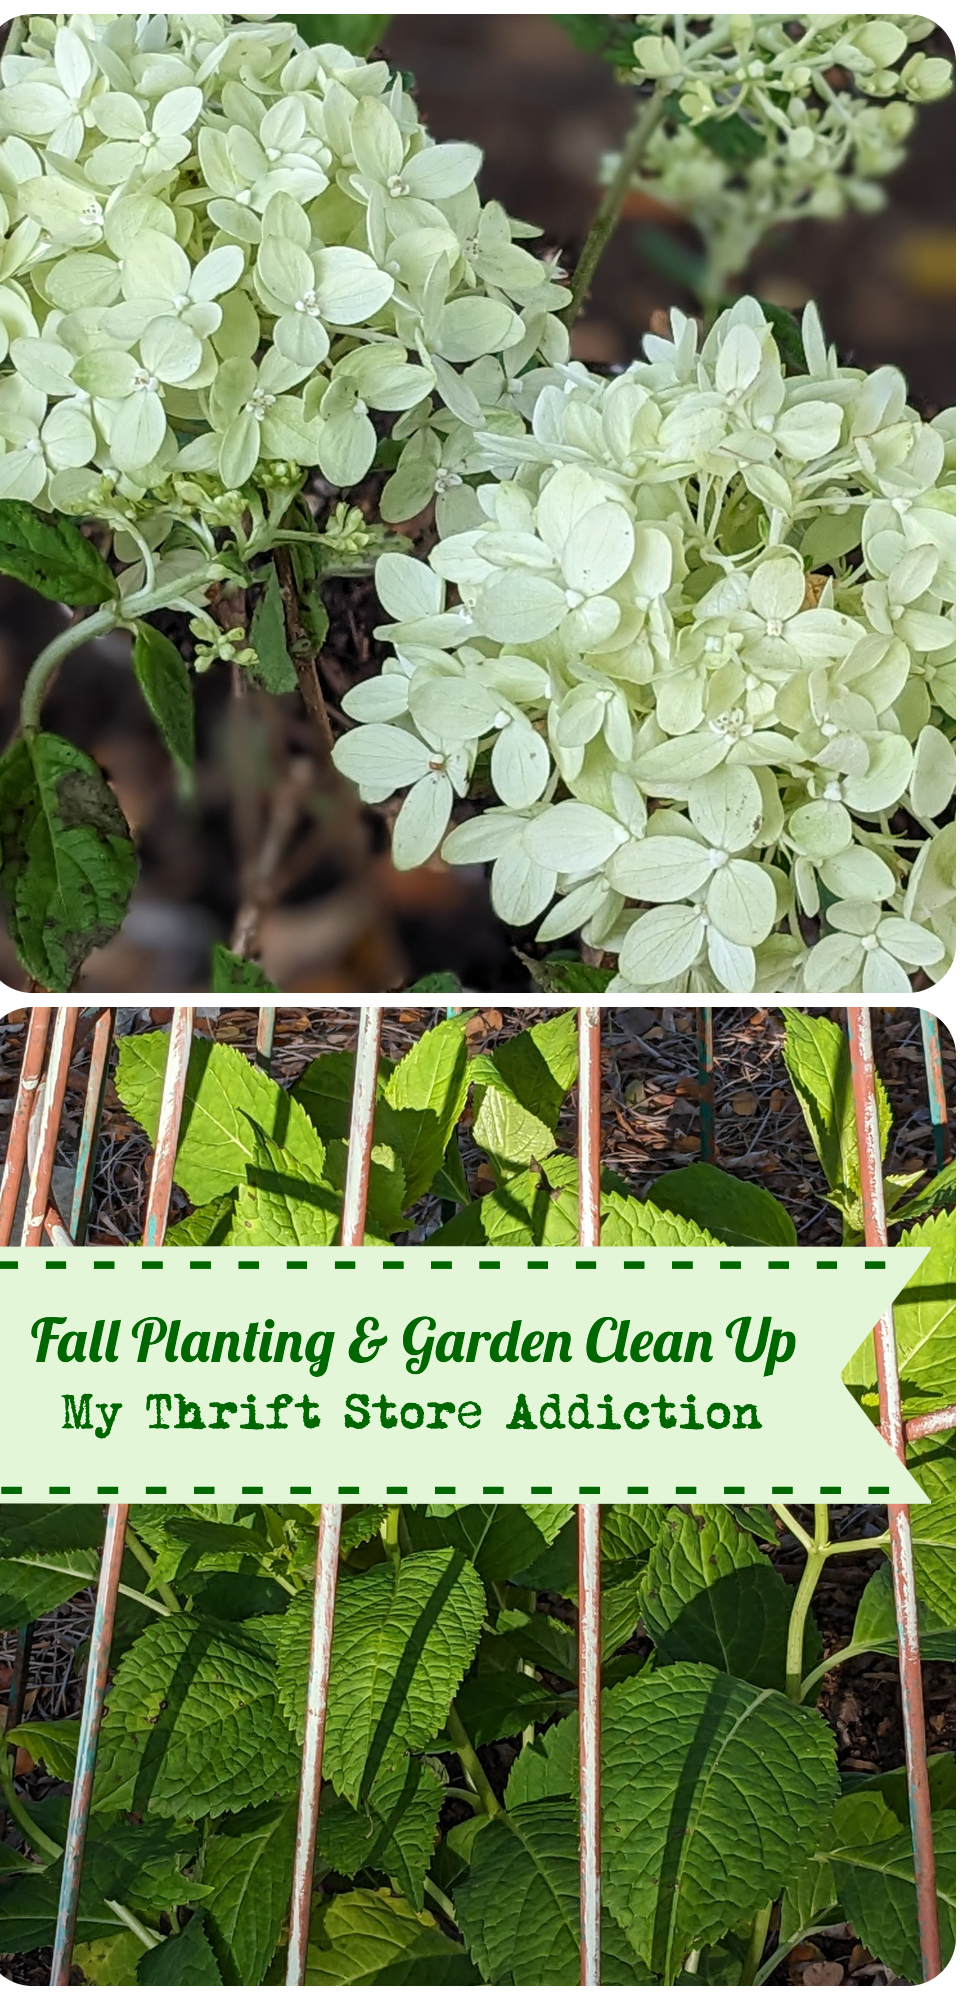 fall planting and garden clean up tips